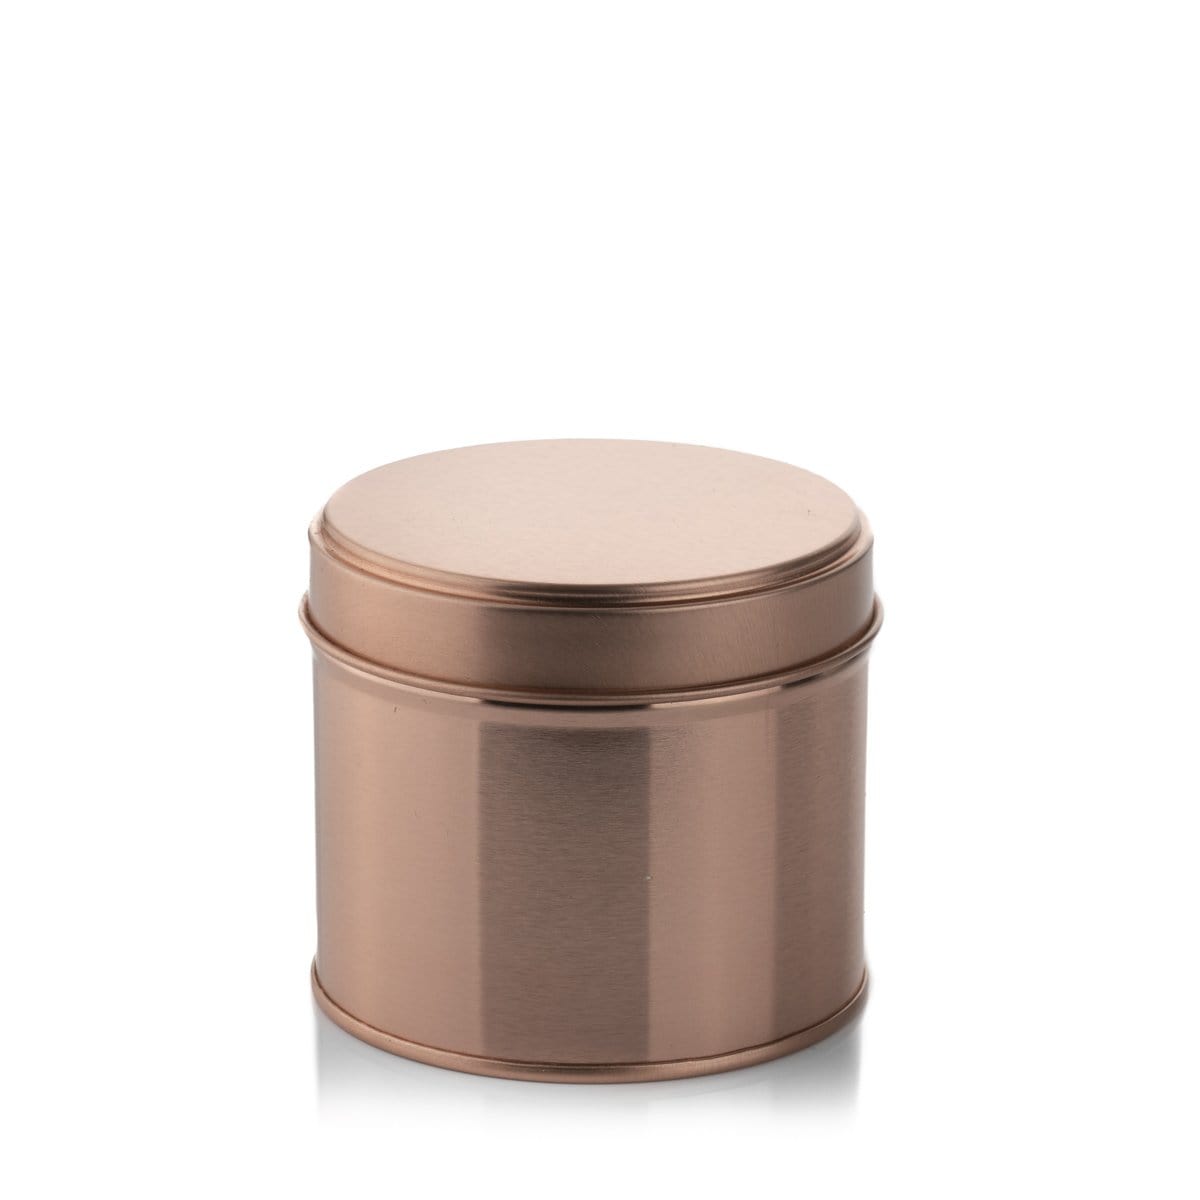 Wholesale High quality candle tins wholesale rose gold copper gold matte  black screw lid candle tins 4 oz ready to ship From m.